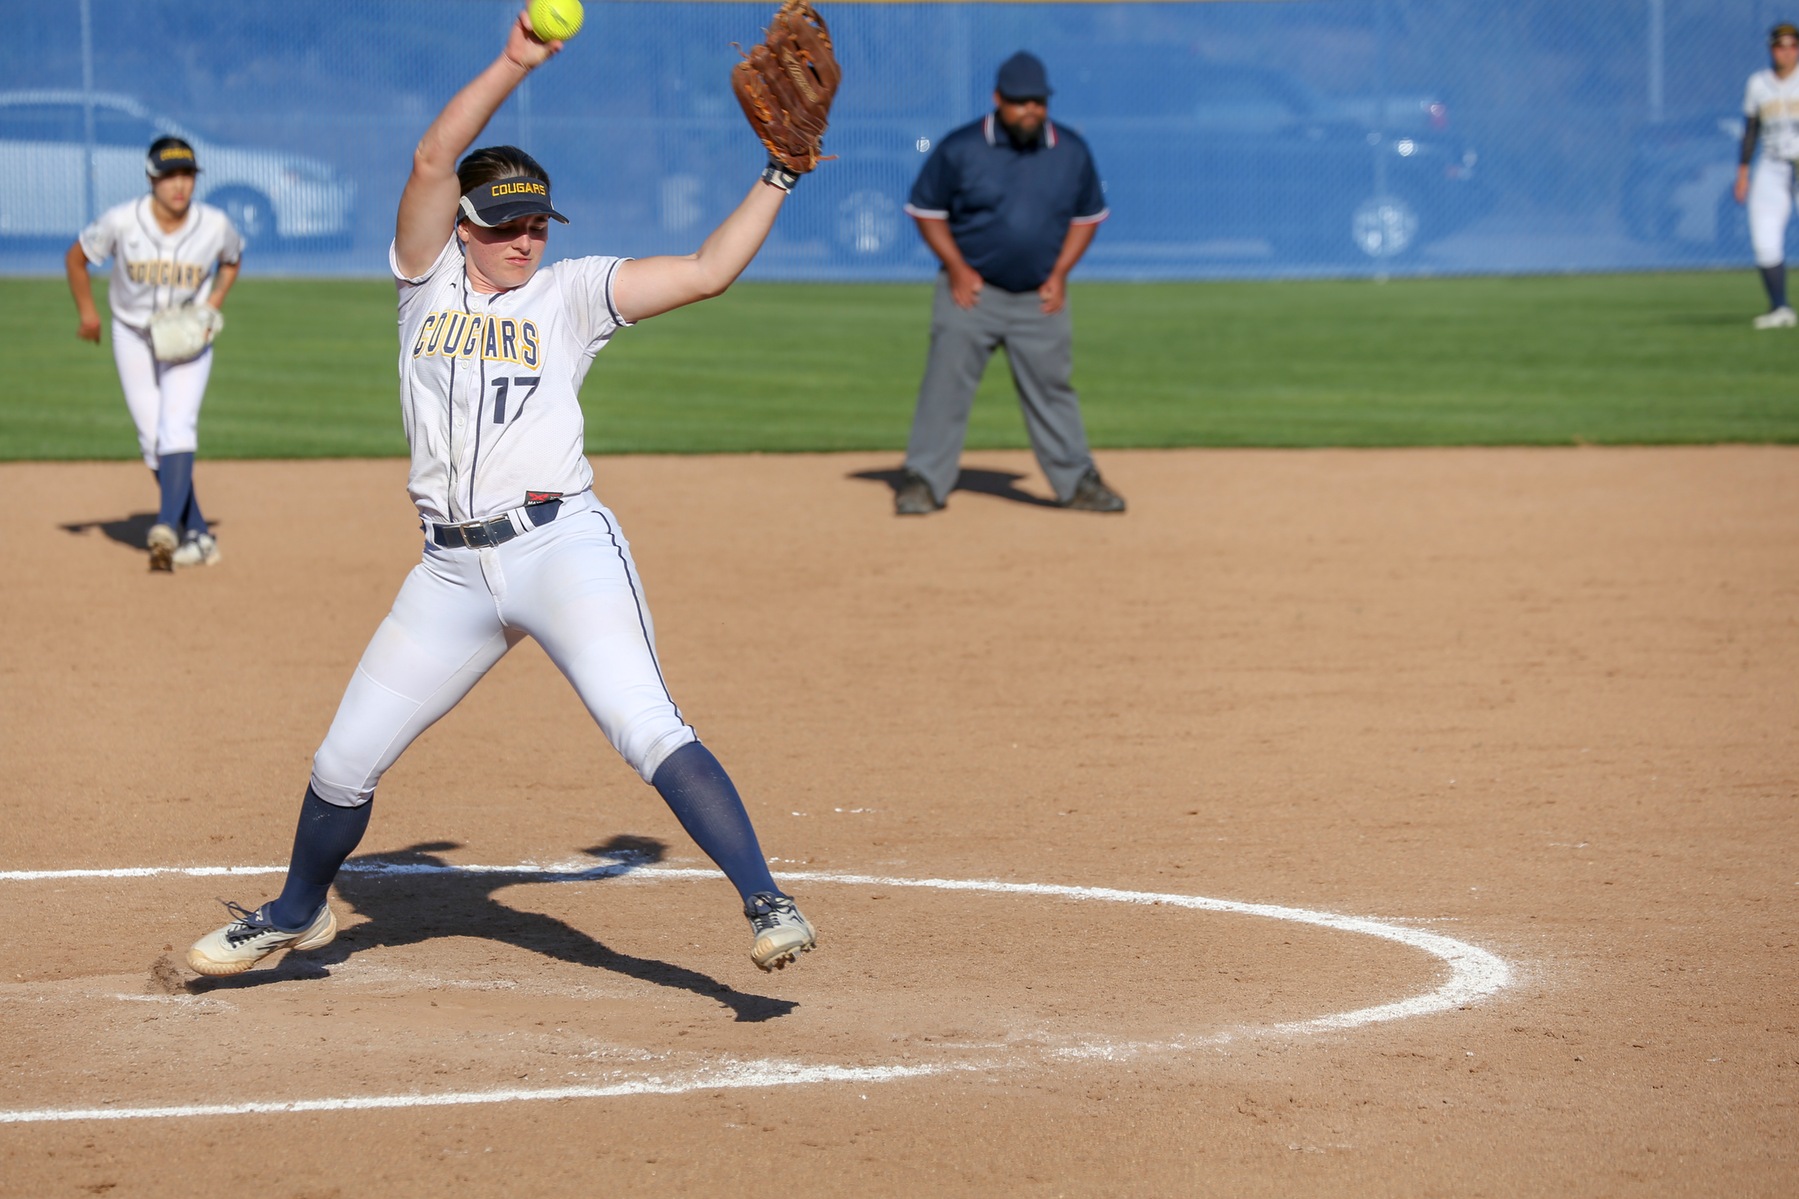 COC softball player Kaitlyn Post vs. S.D. Mesa College on March 30, 2019.